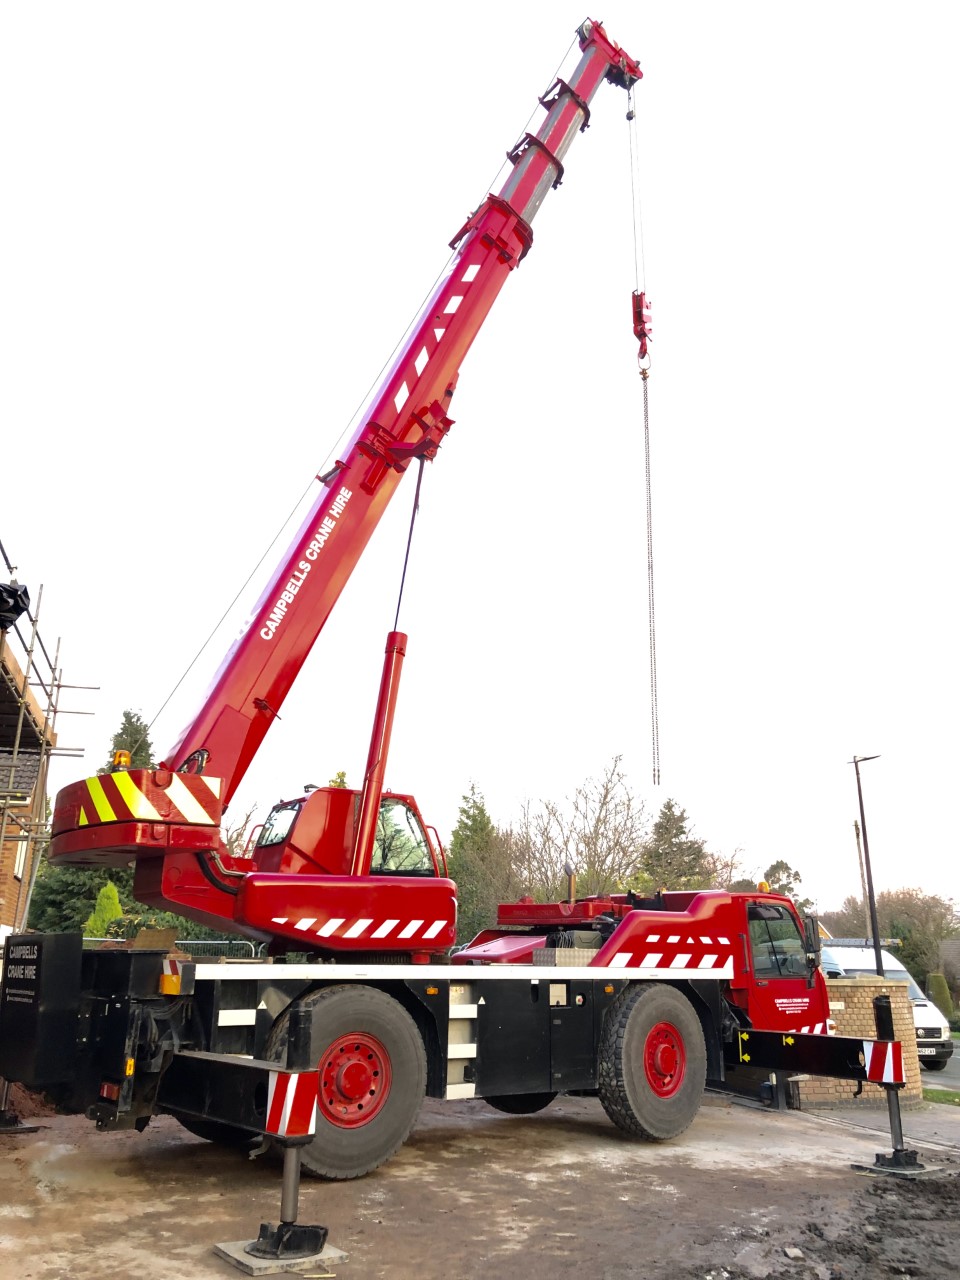 Campbells Crane Hire based in Oldham, Greater Manchester